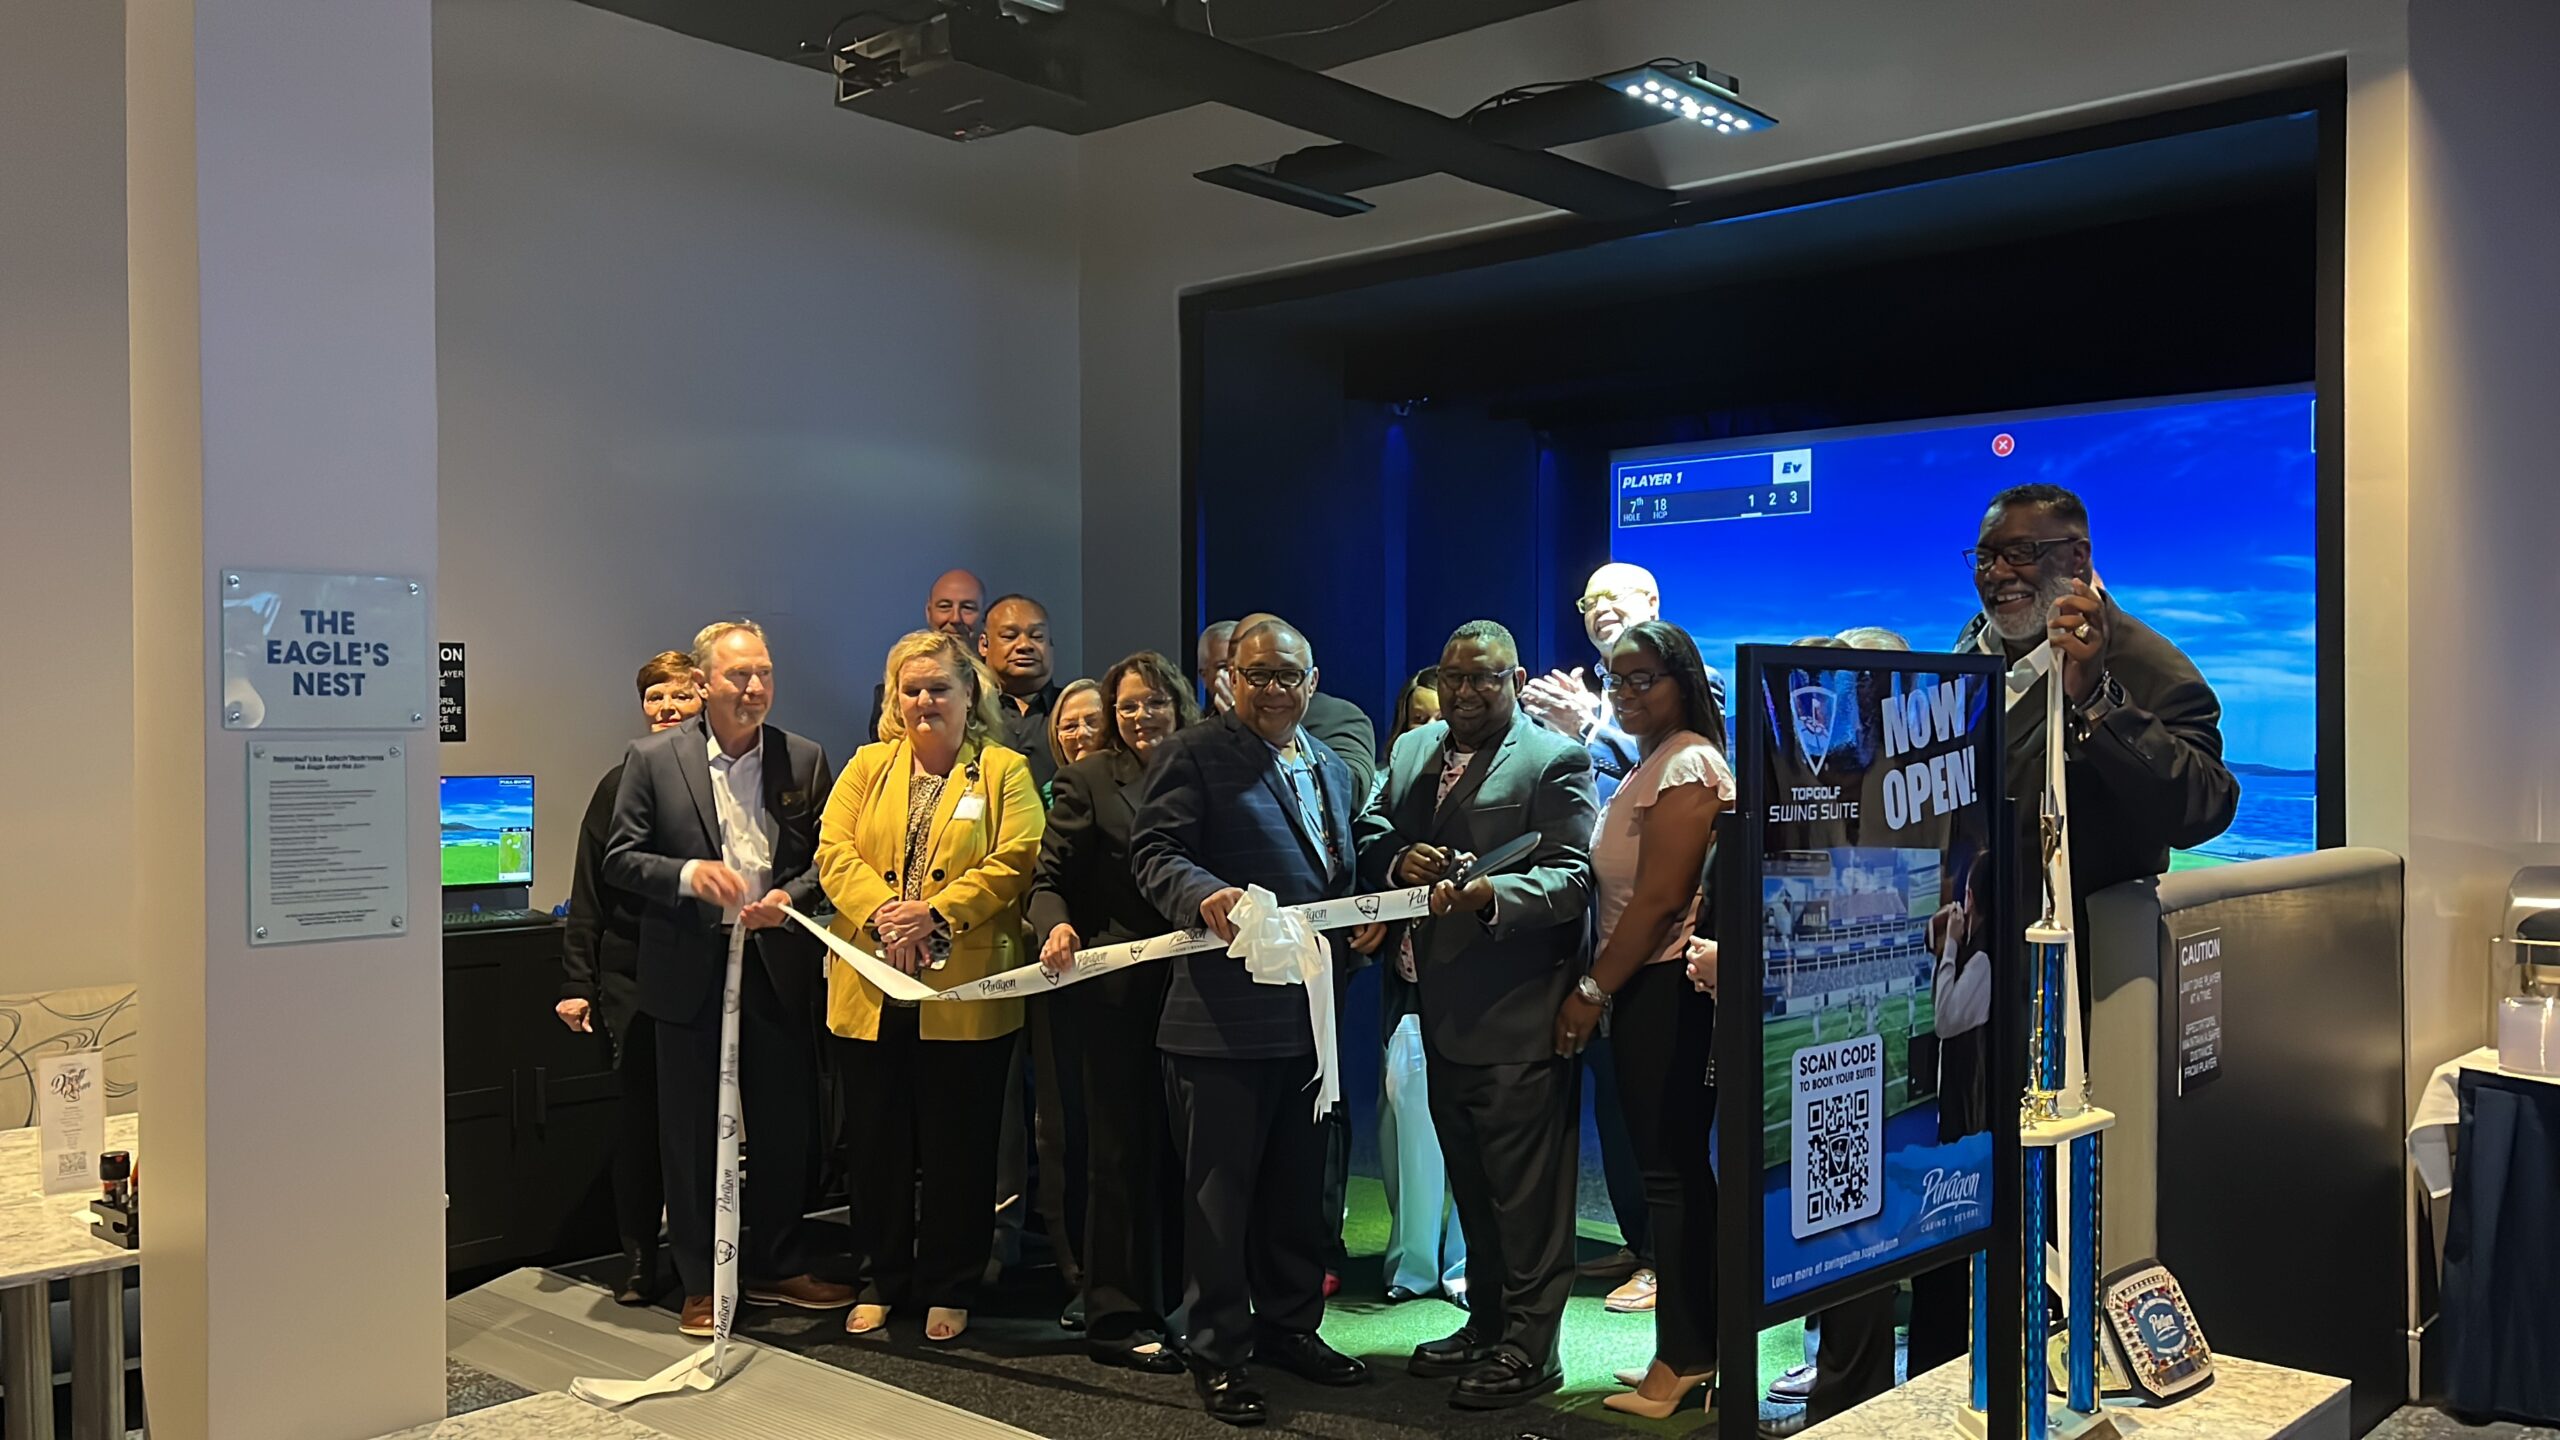 Topgolf Swing Suite Officially Opens at Paragon Casino Resort with Ribbon Cutting Ceremony